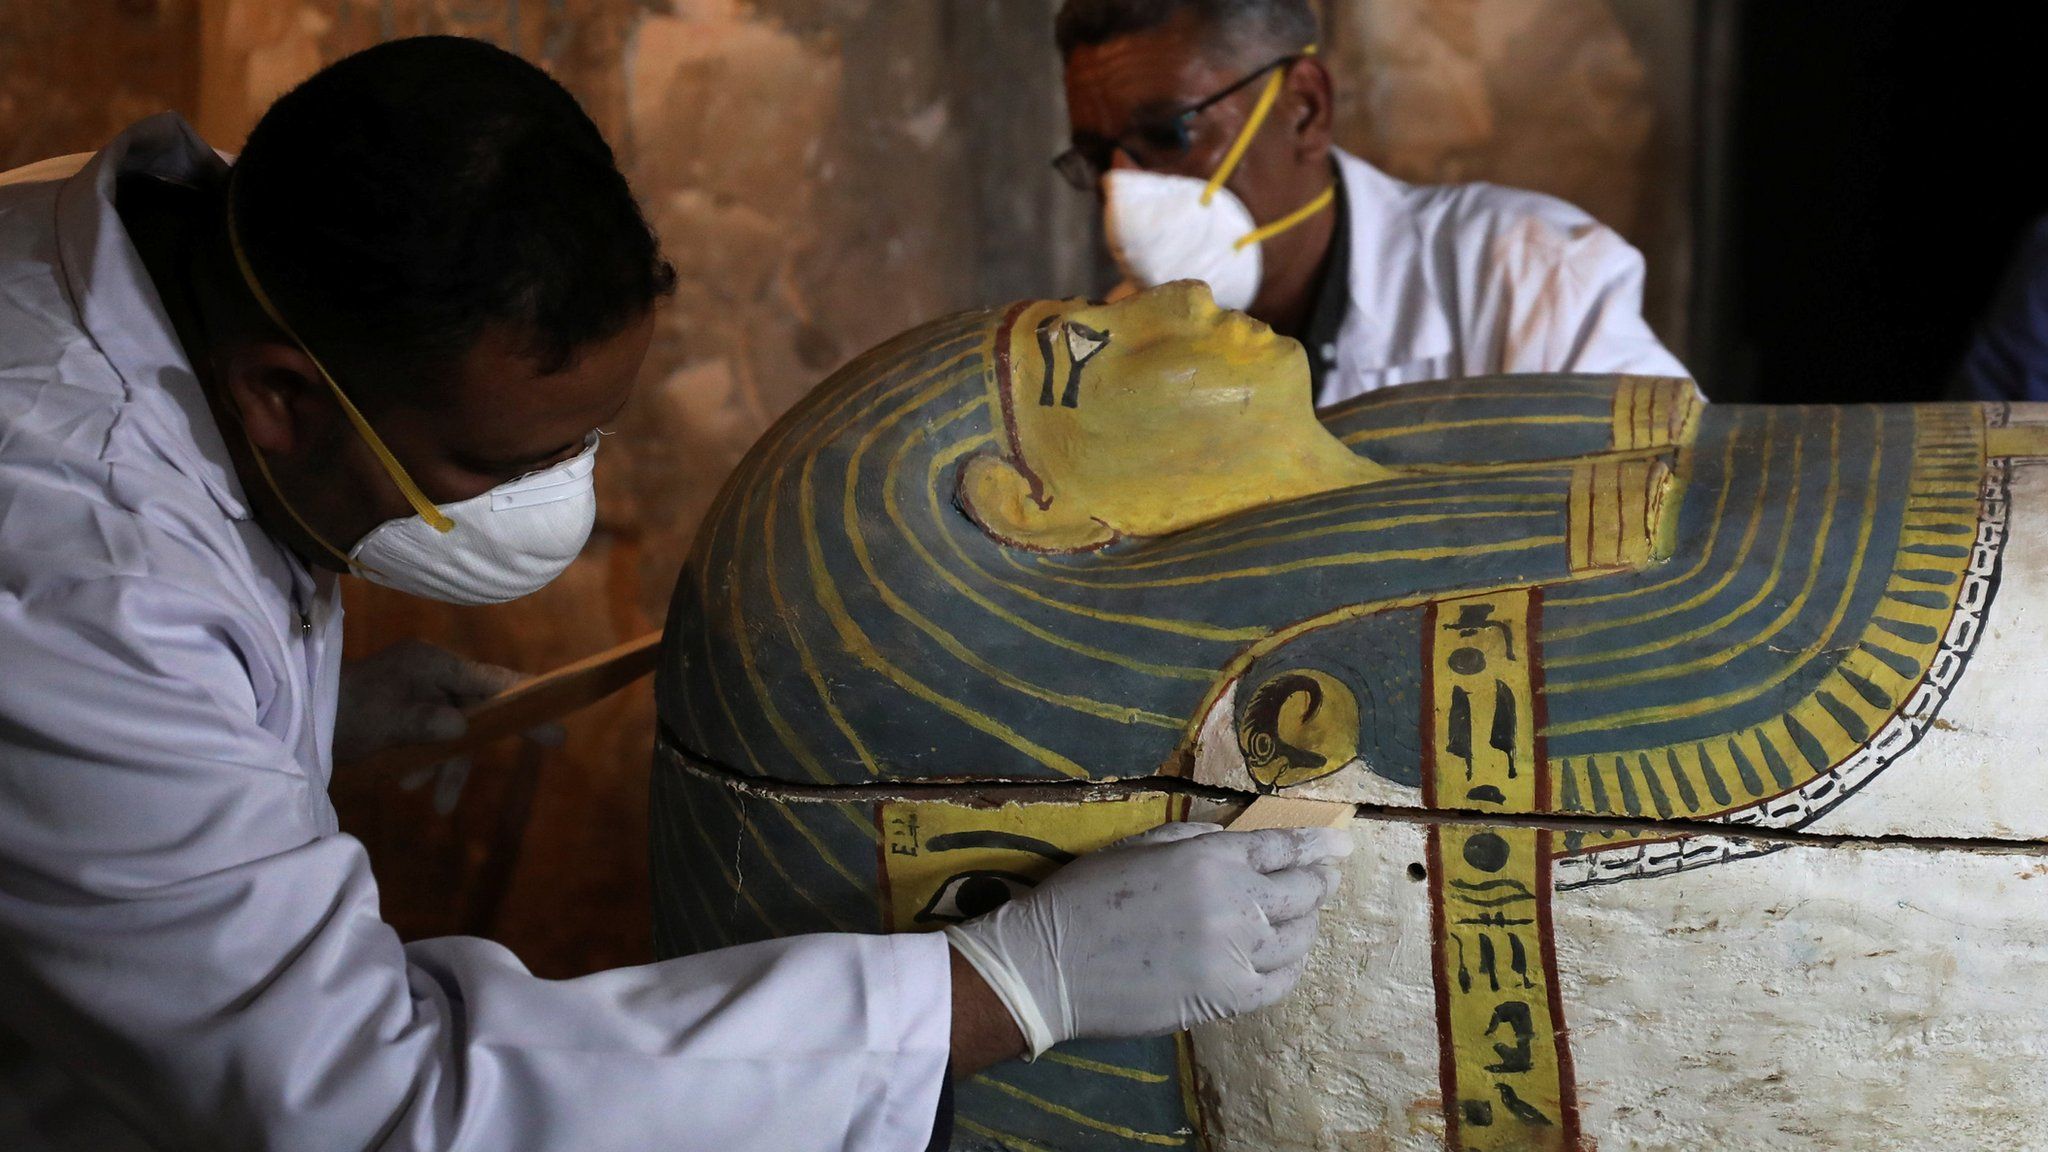 Sarcophagi and mummies discovered at Luxor site